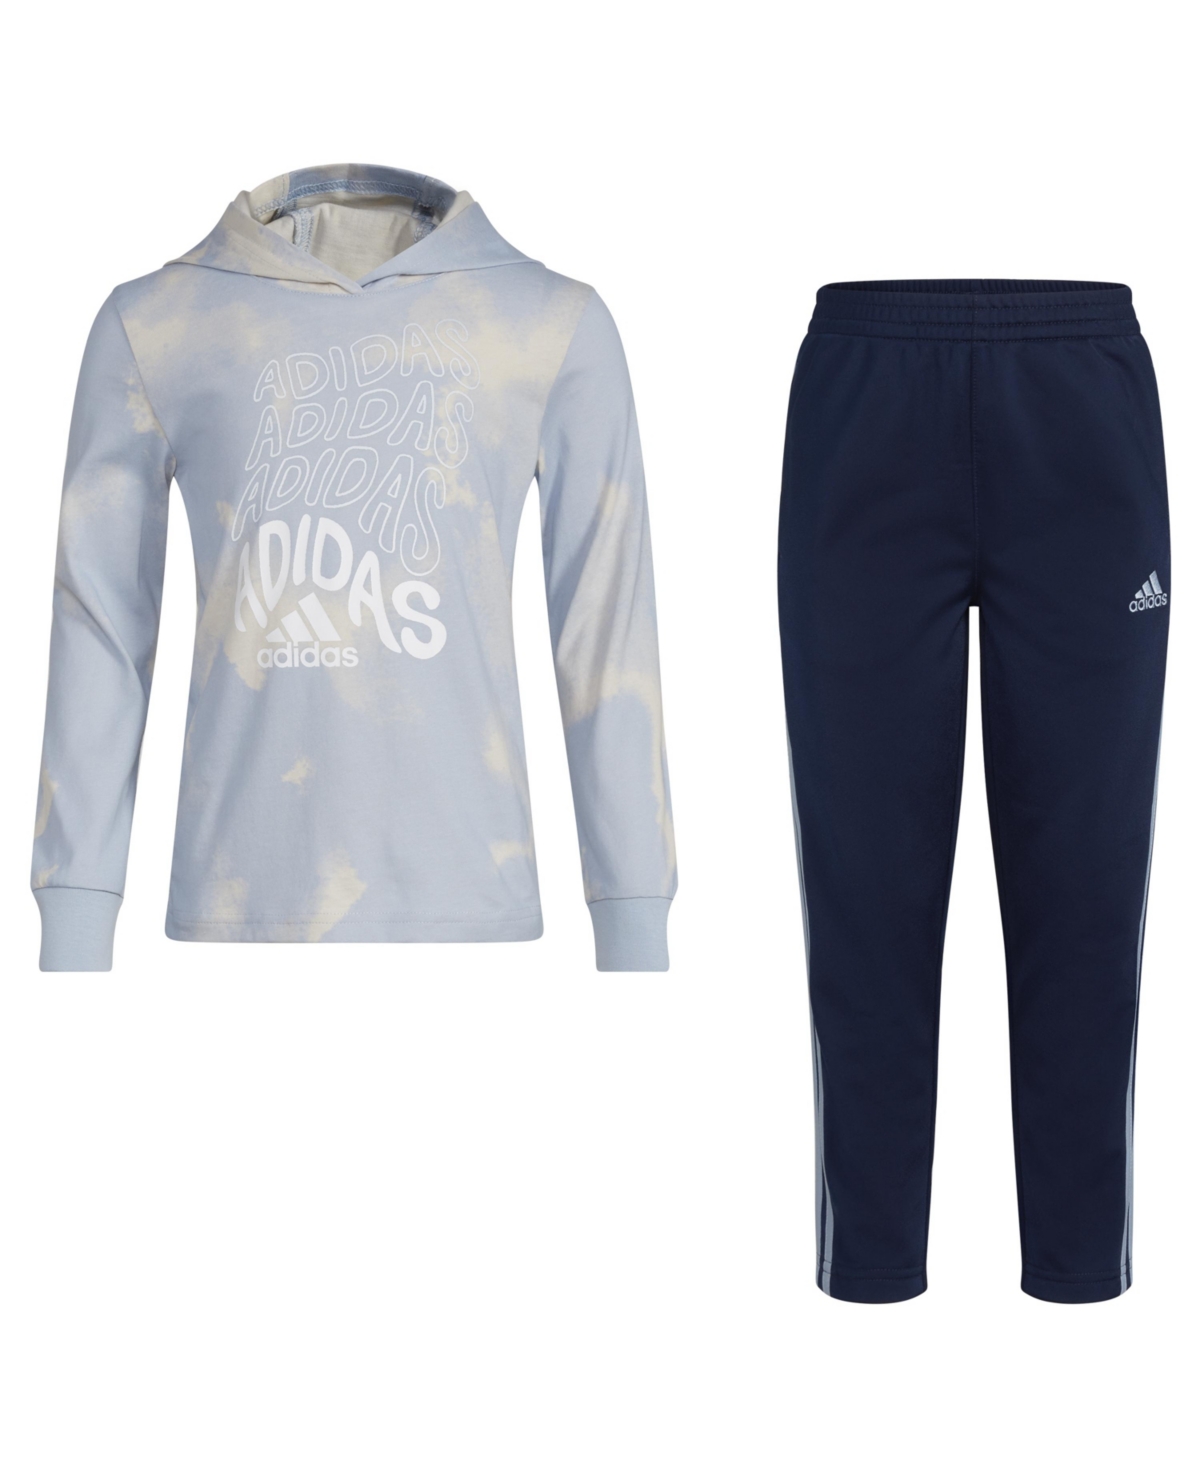 Adidas Originals Toddler Boys Long Sleeve Hooded Printed T-shirt And Pants, 2 Piece Set In Wonder Blue